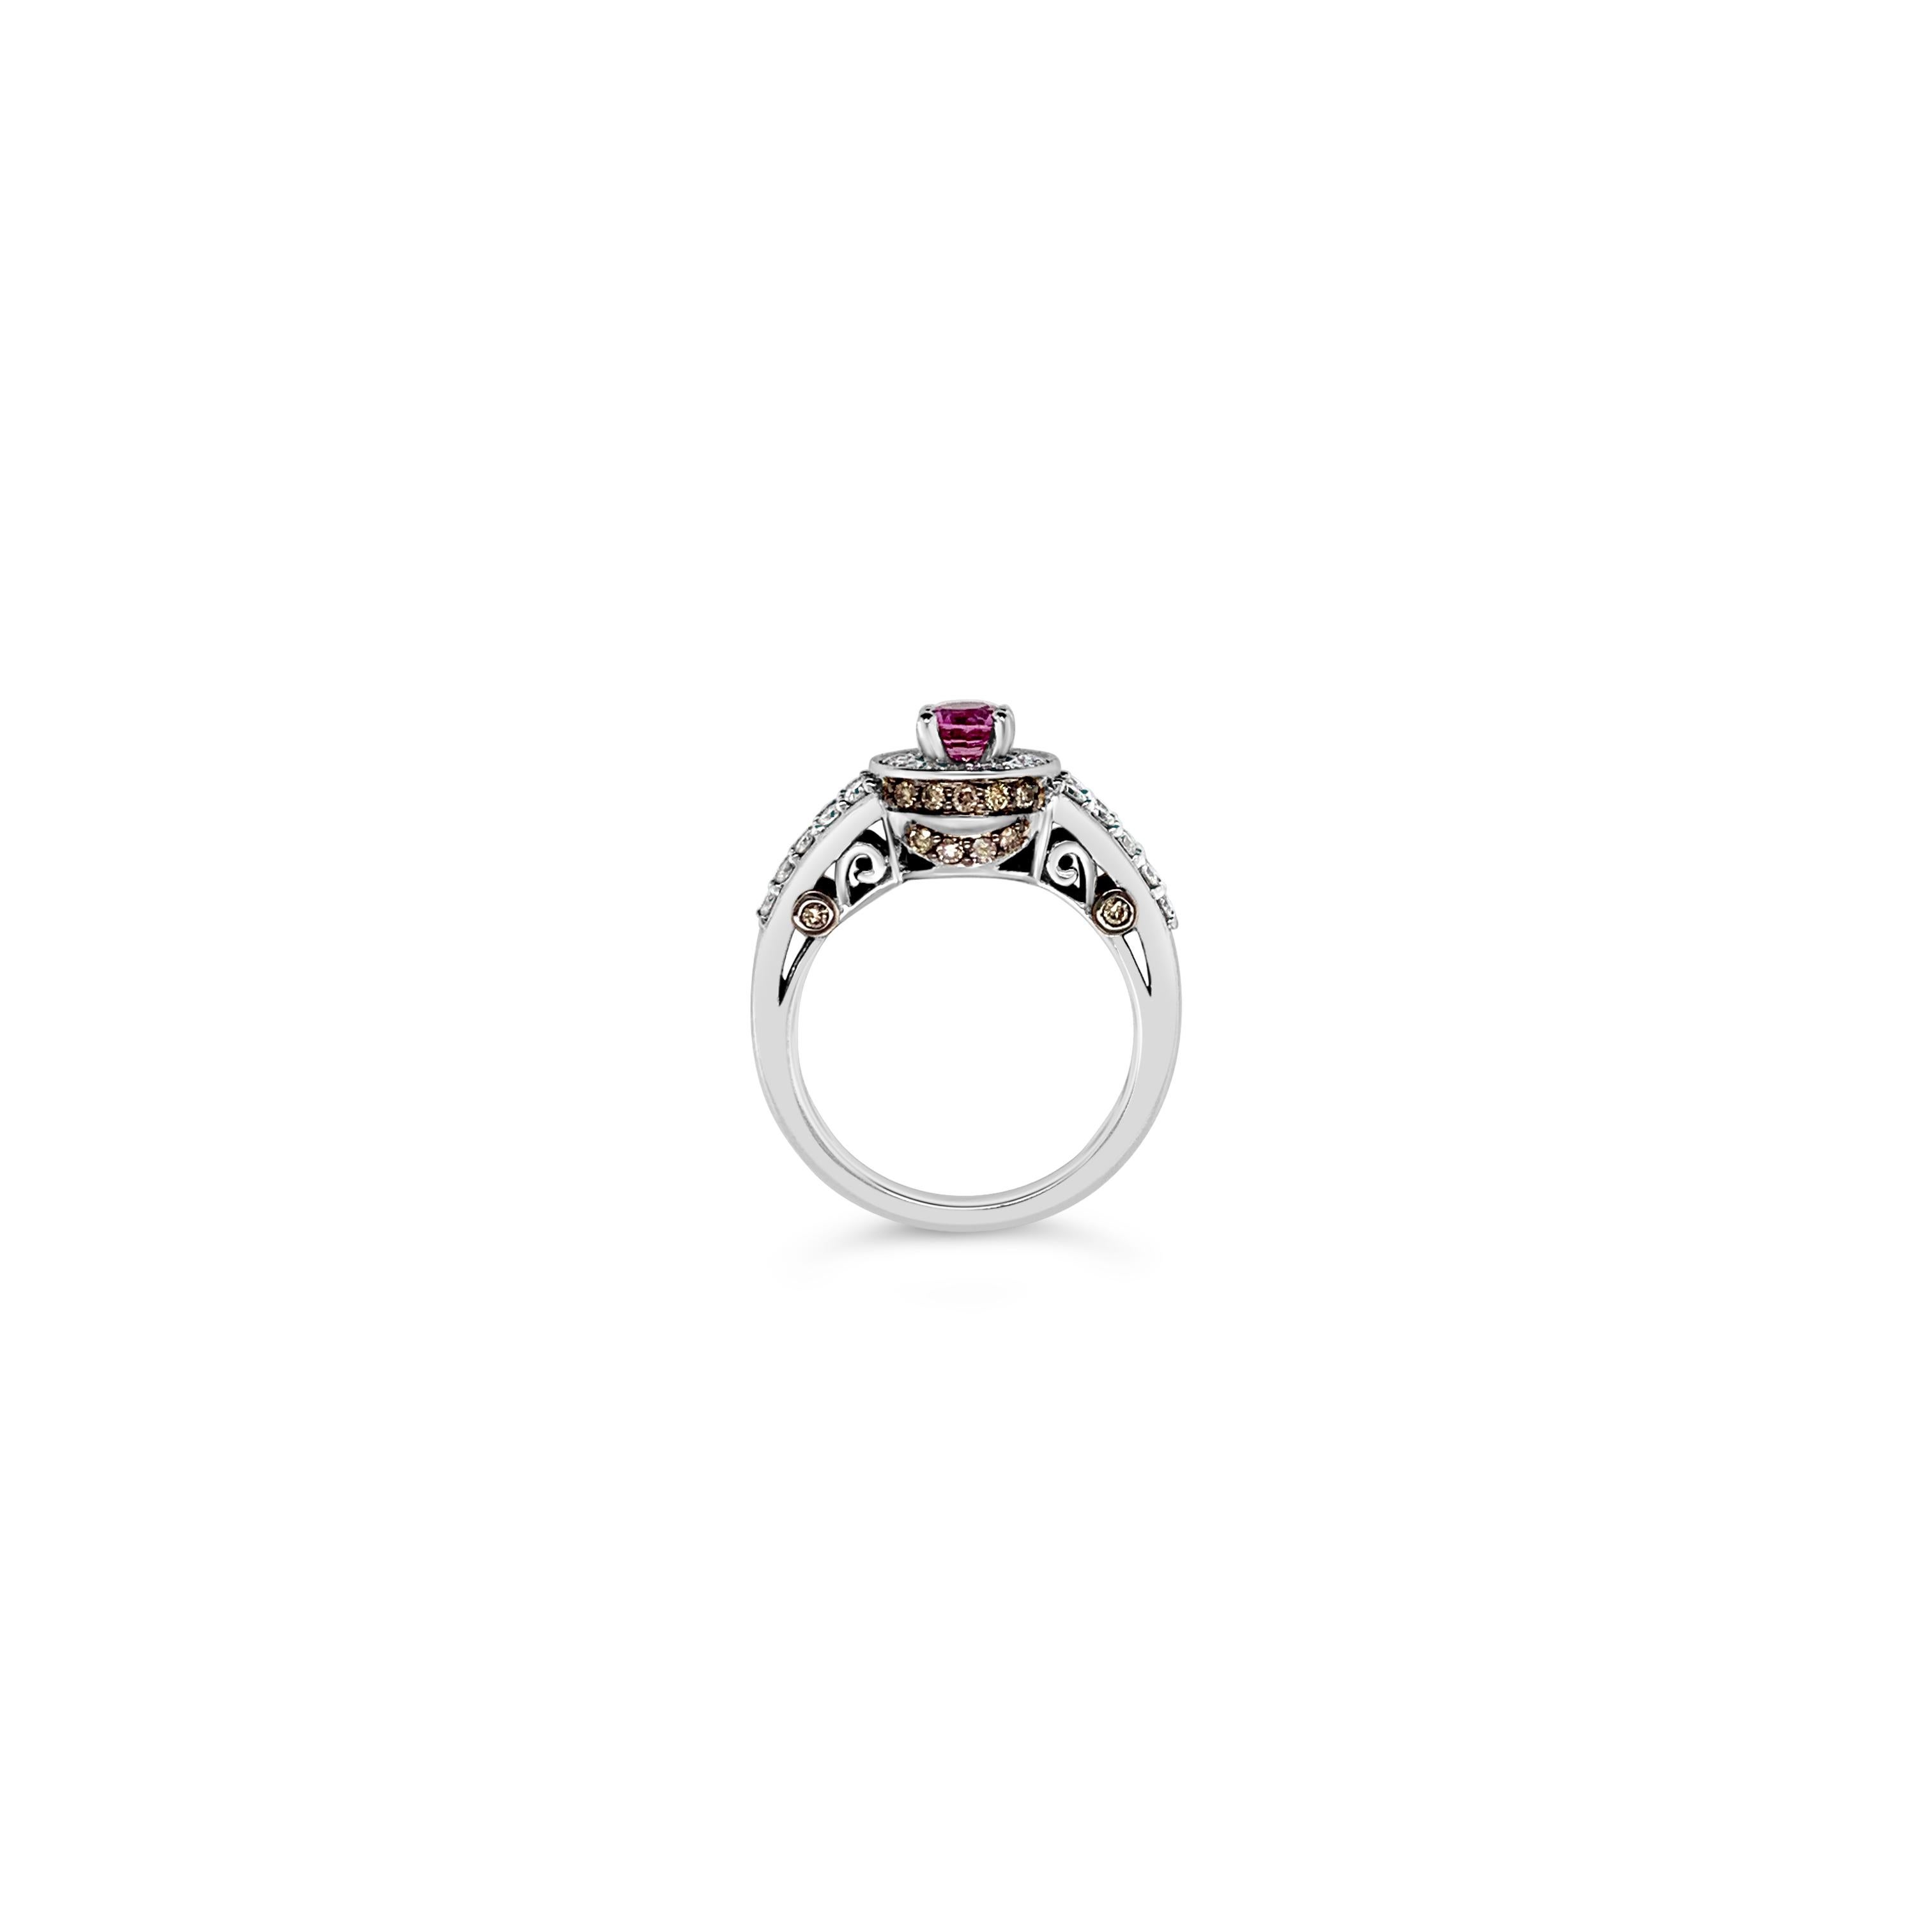 Le Vian Bridal® Ring featuring 0.58 cts. Purple Sapphire, 0.46 cts. Vanilla Diamonds® , 0.23 cts. Chocolate Diamonds®  set in 14K Vanilla Gold®
Ring size 6.75
A Perfect Gift – Looking for a birthday or Mother’s Day gift idea for your mom, daughter,